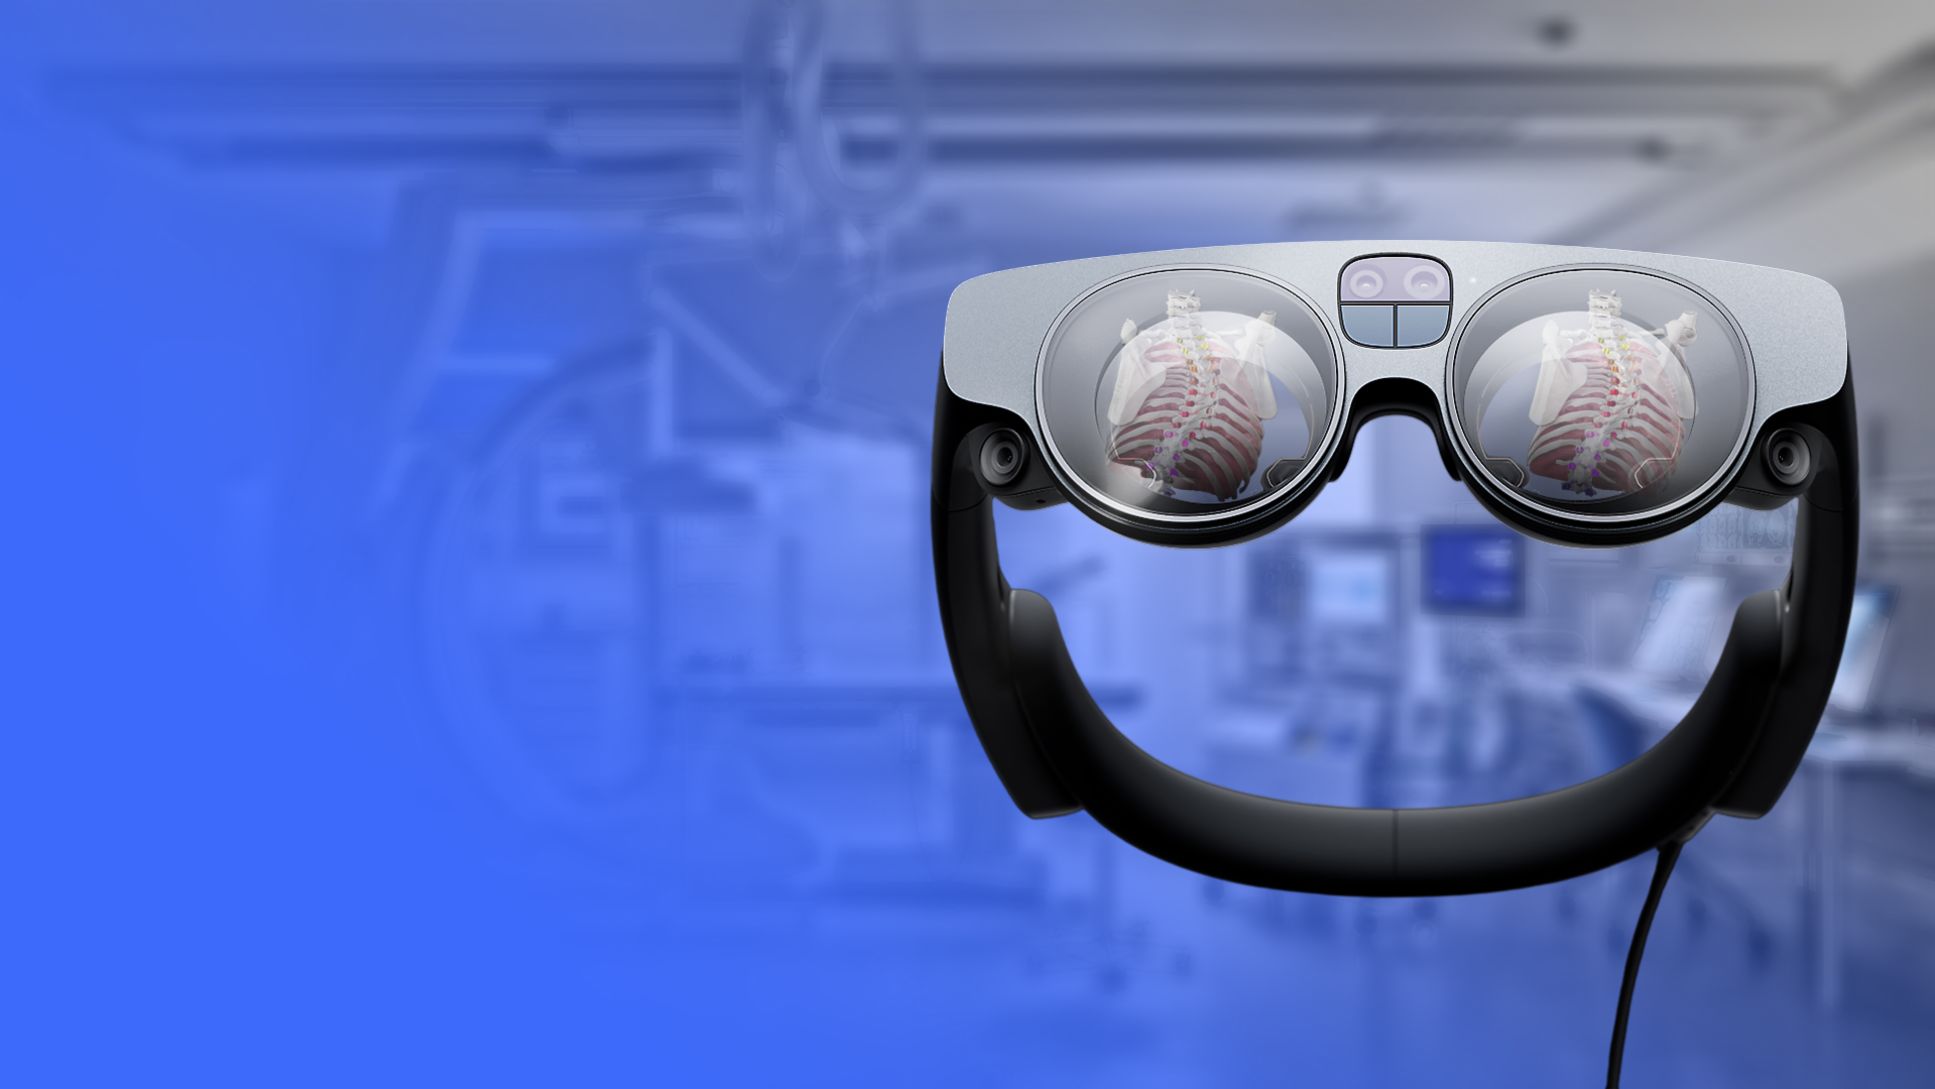 The metaverse has entered the OR: augmented reality systems can help doctors better prepare for operations and perform them with greater precision, 2023, Porsche Consulting